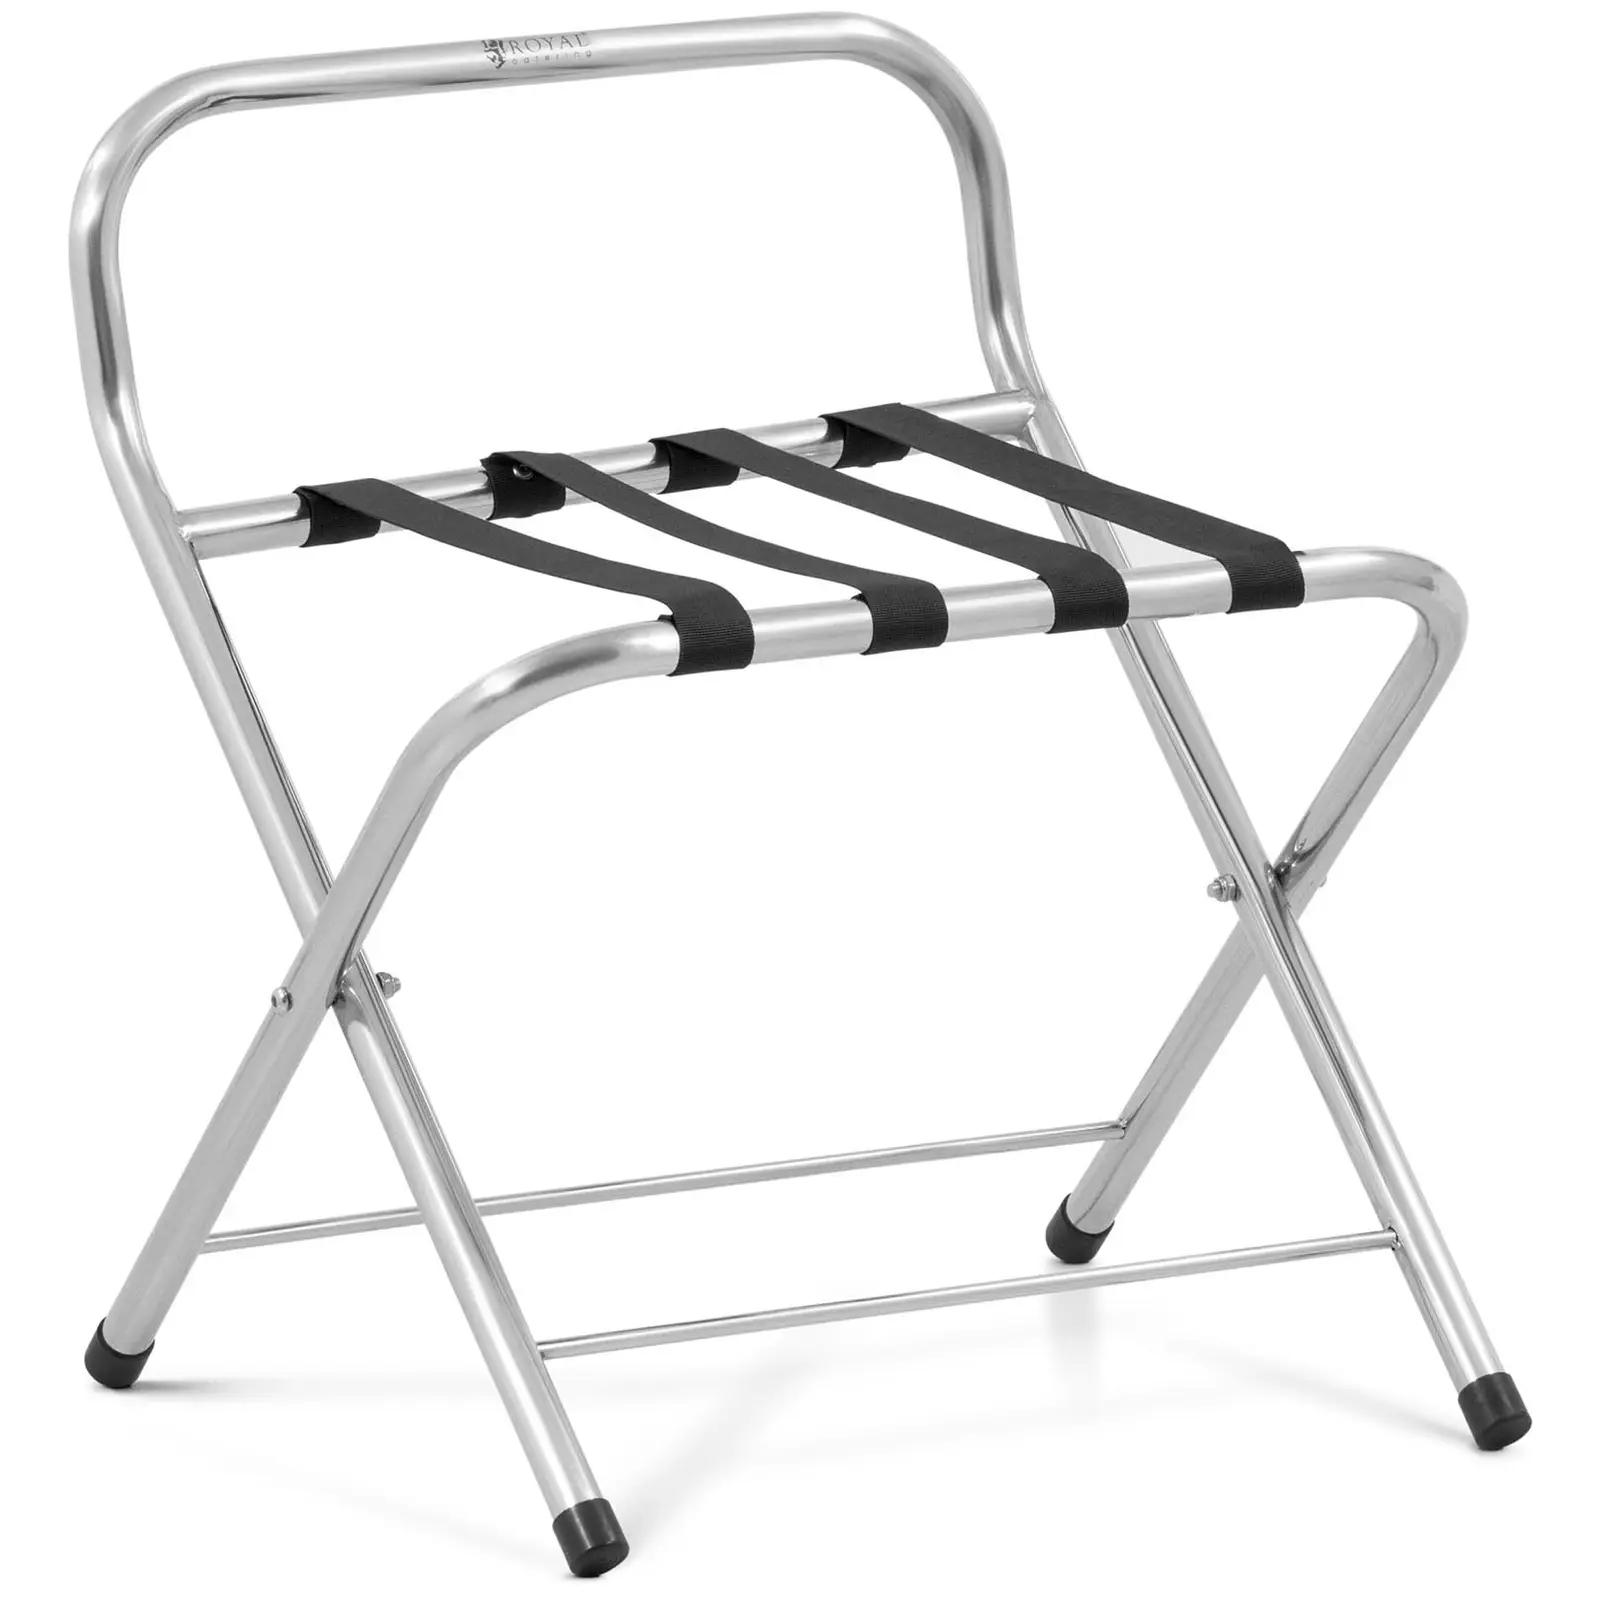 Suitcase Stand - folding - over 50 kg